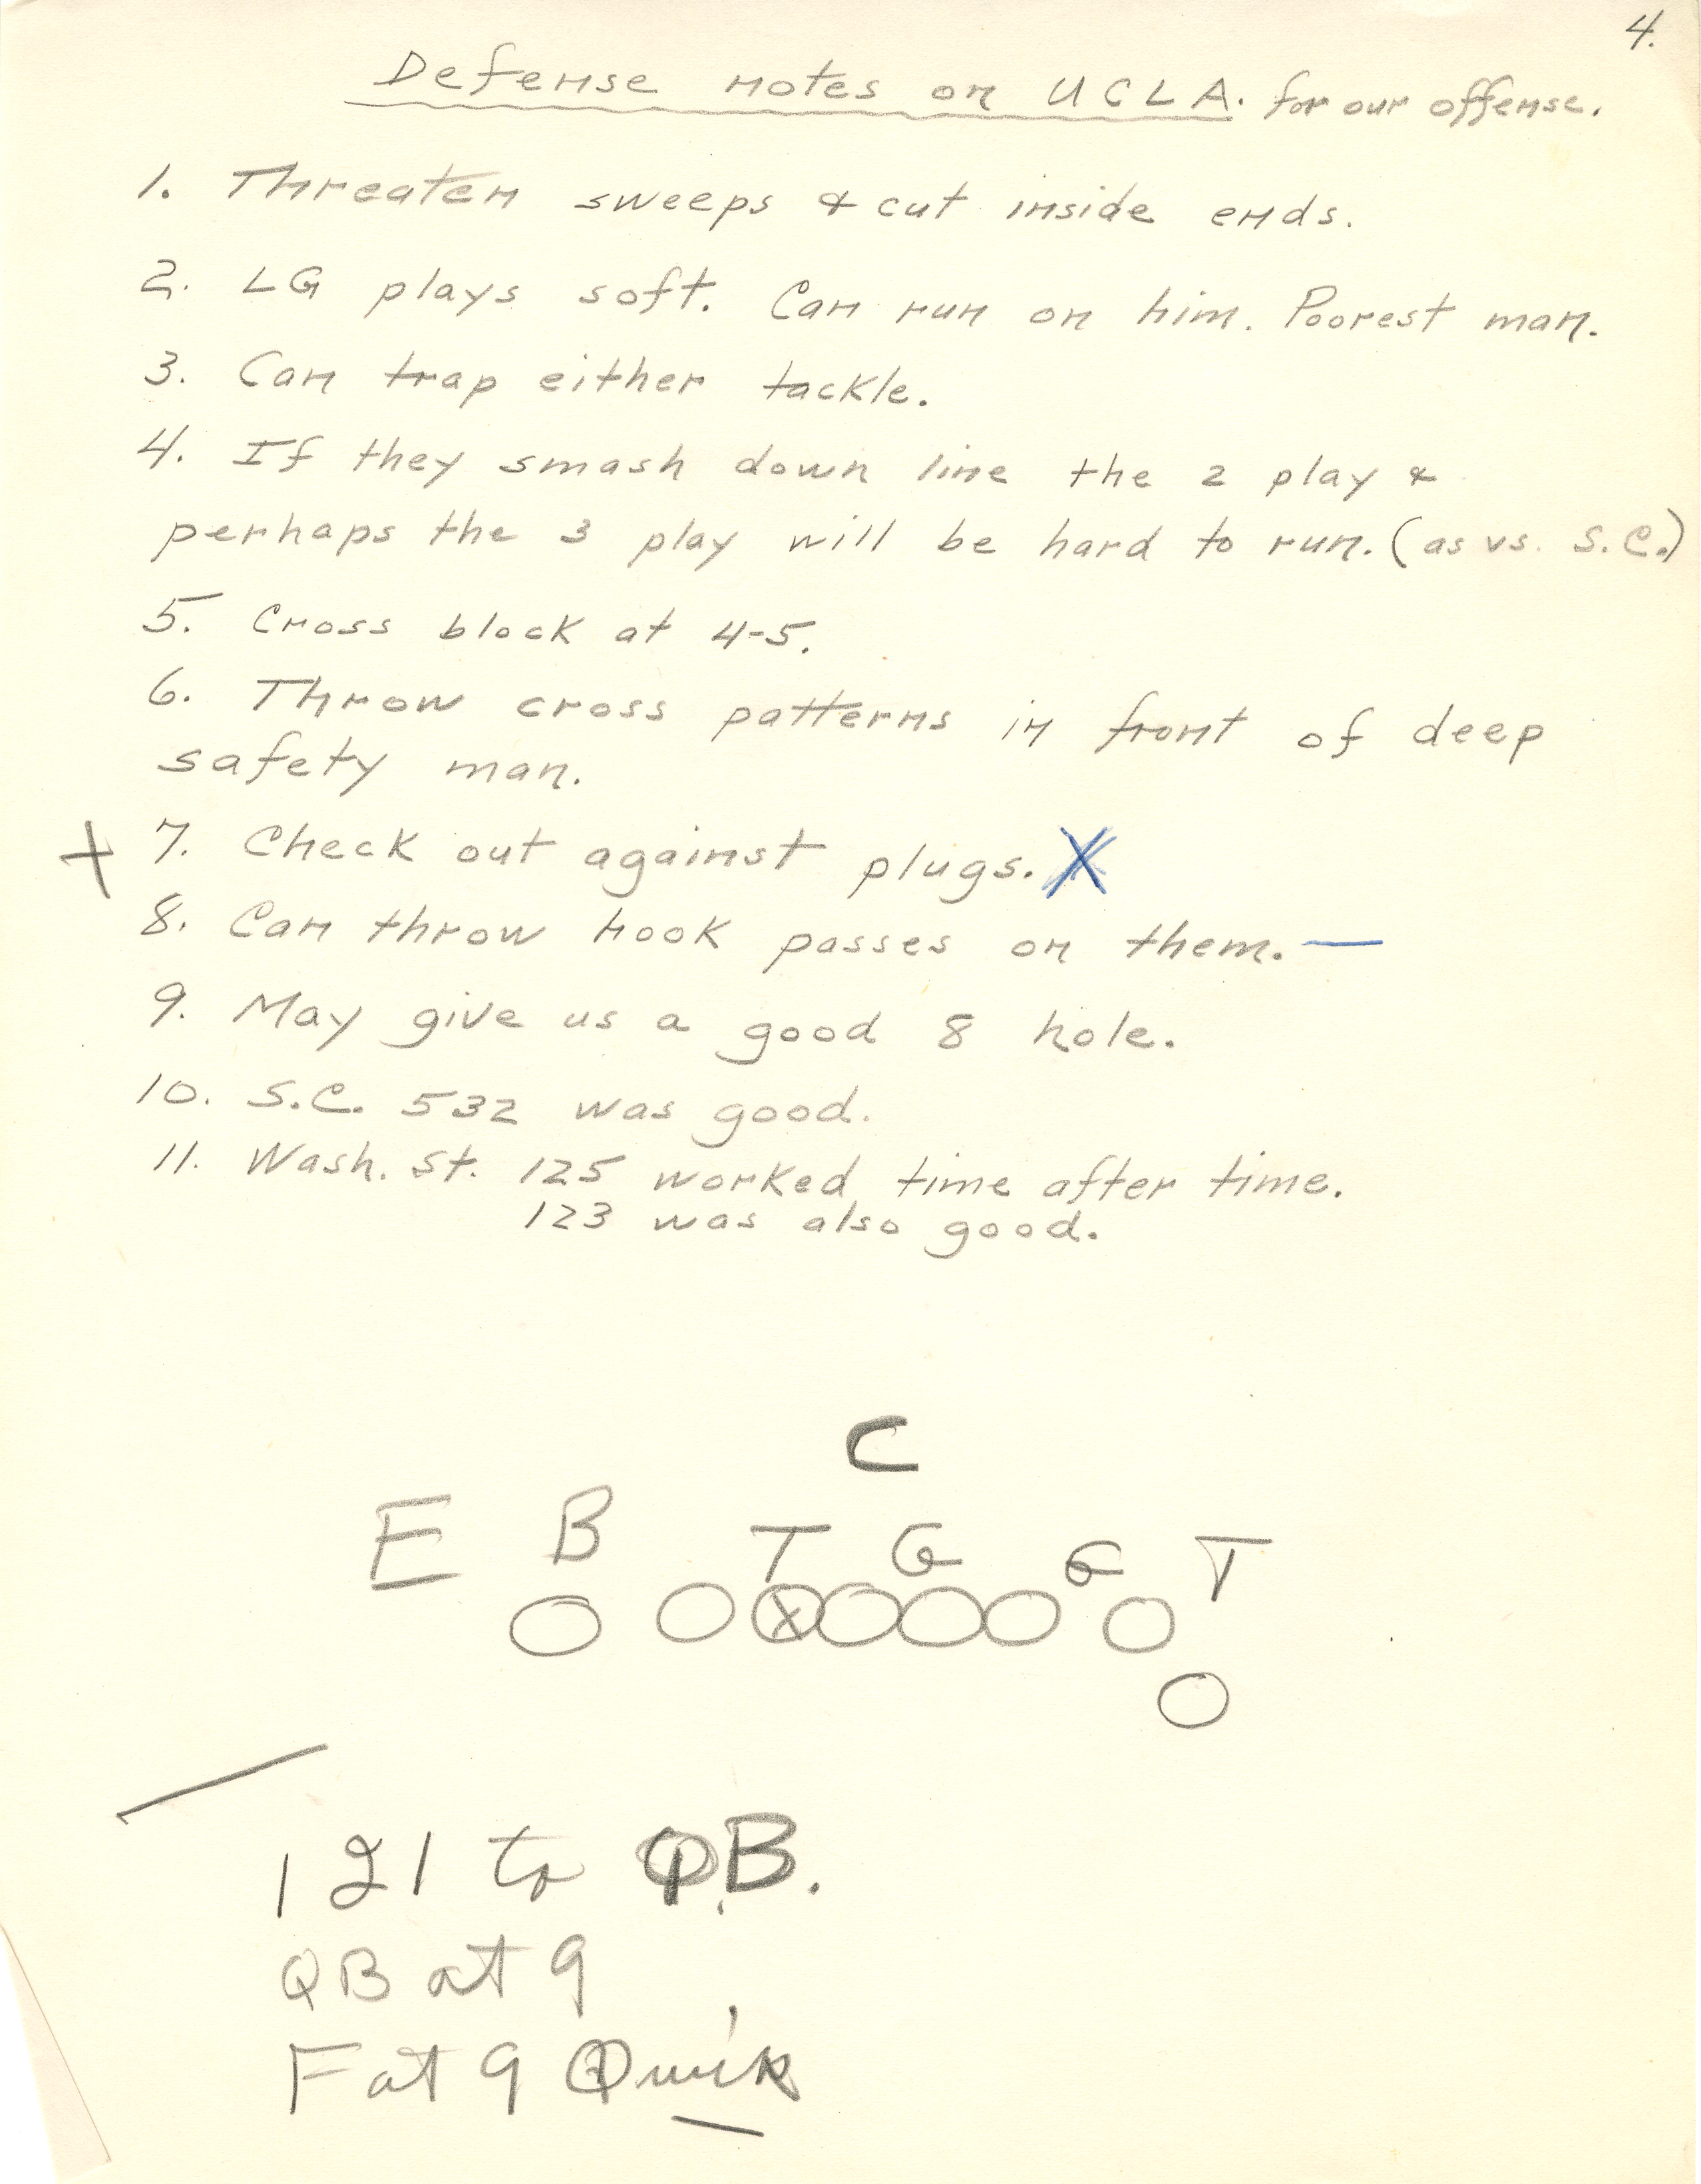 Defense notes on U.C.L.A. for our offense, 1953